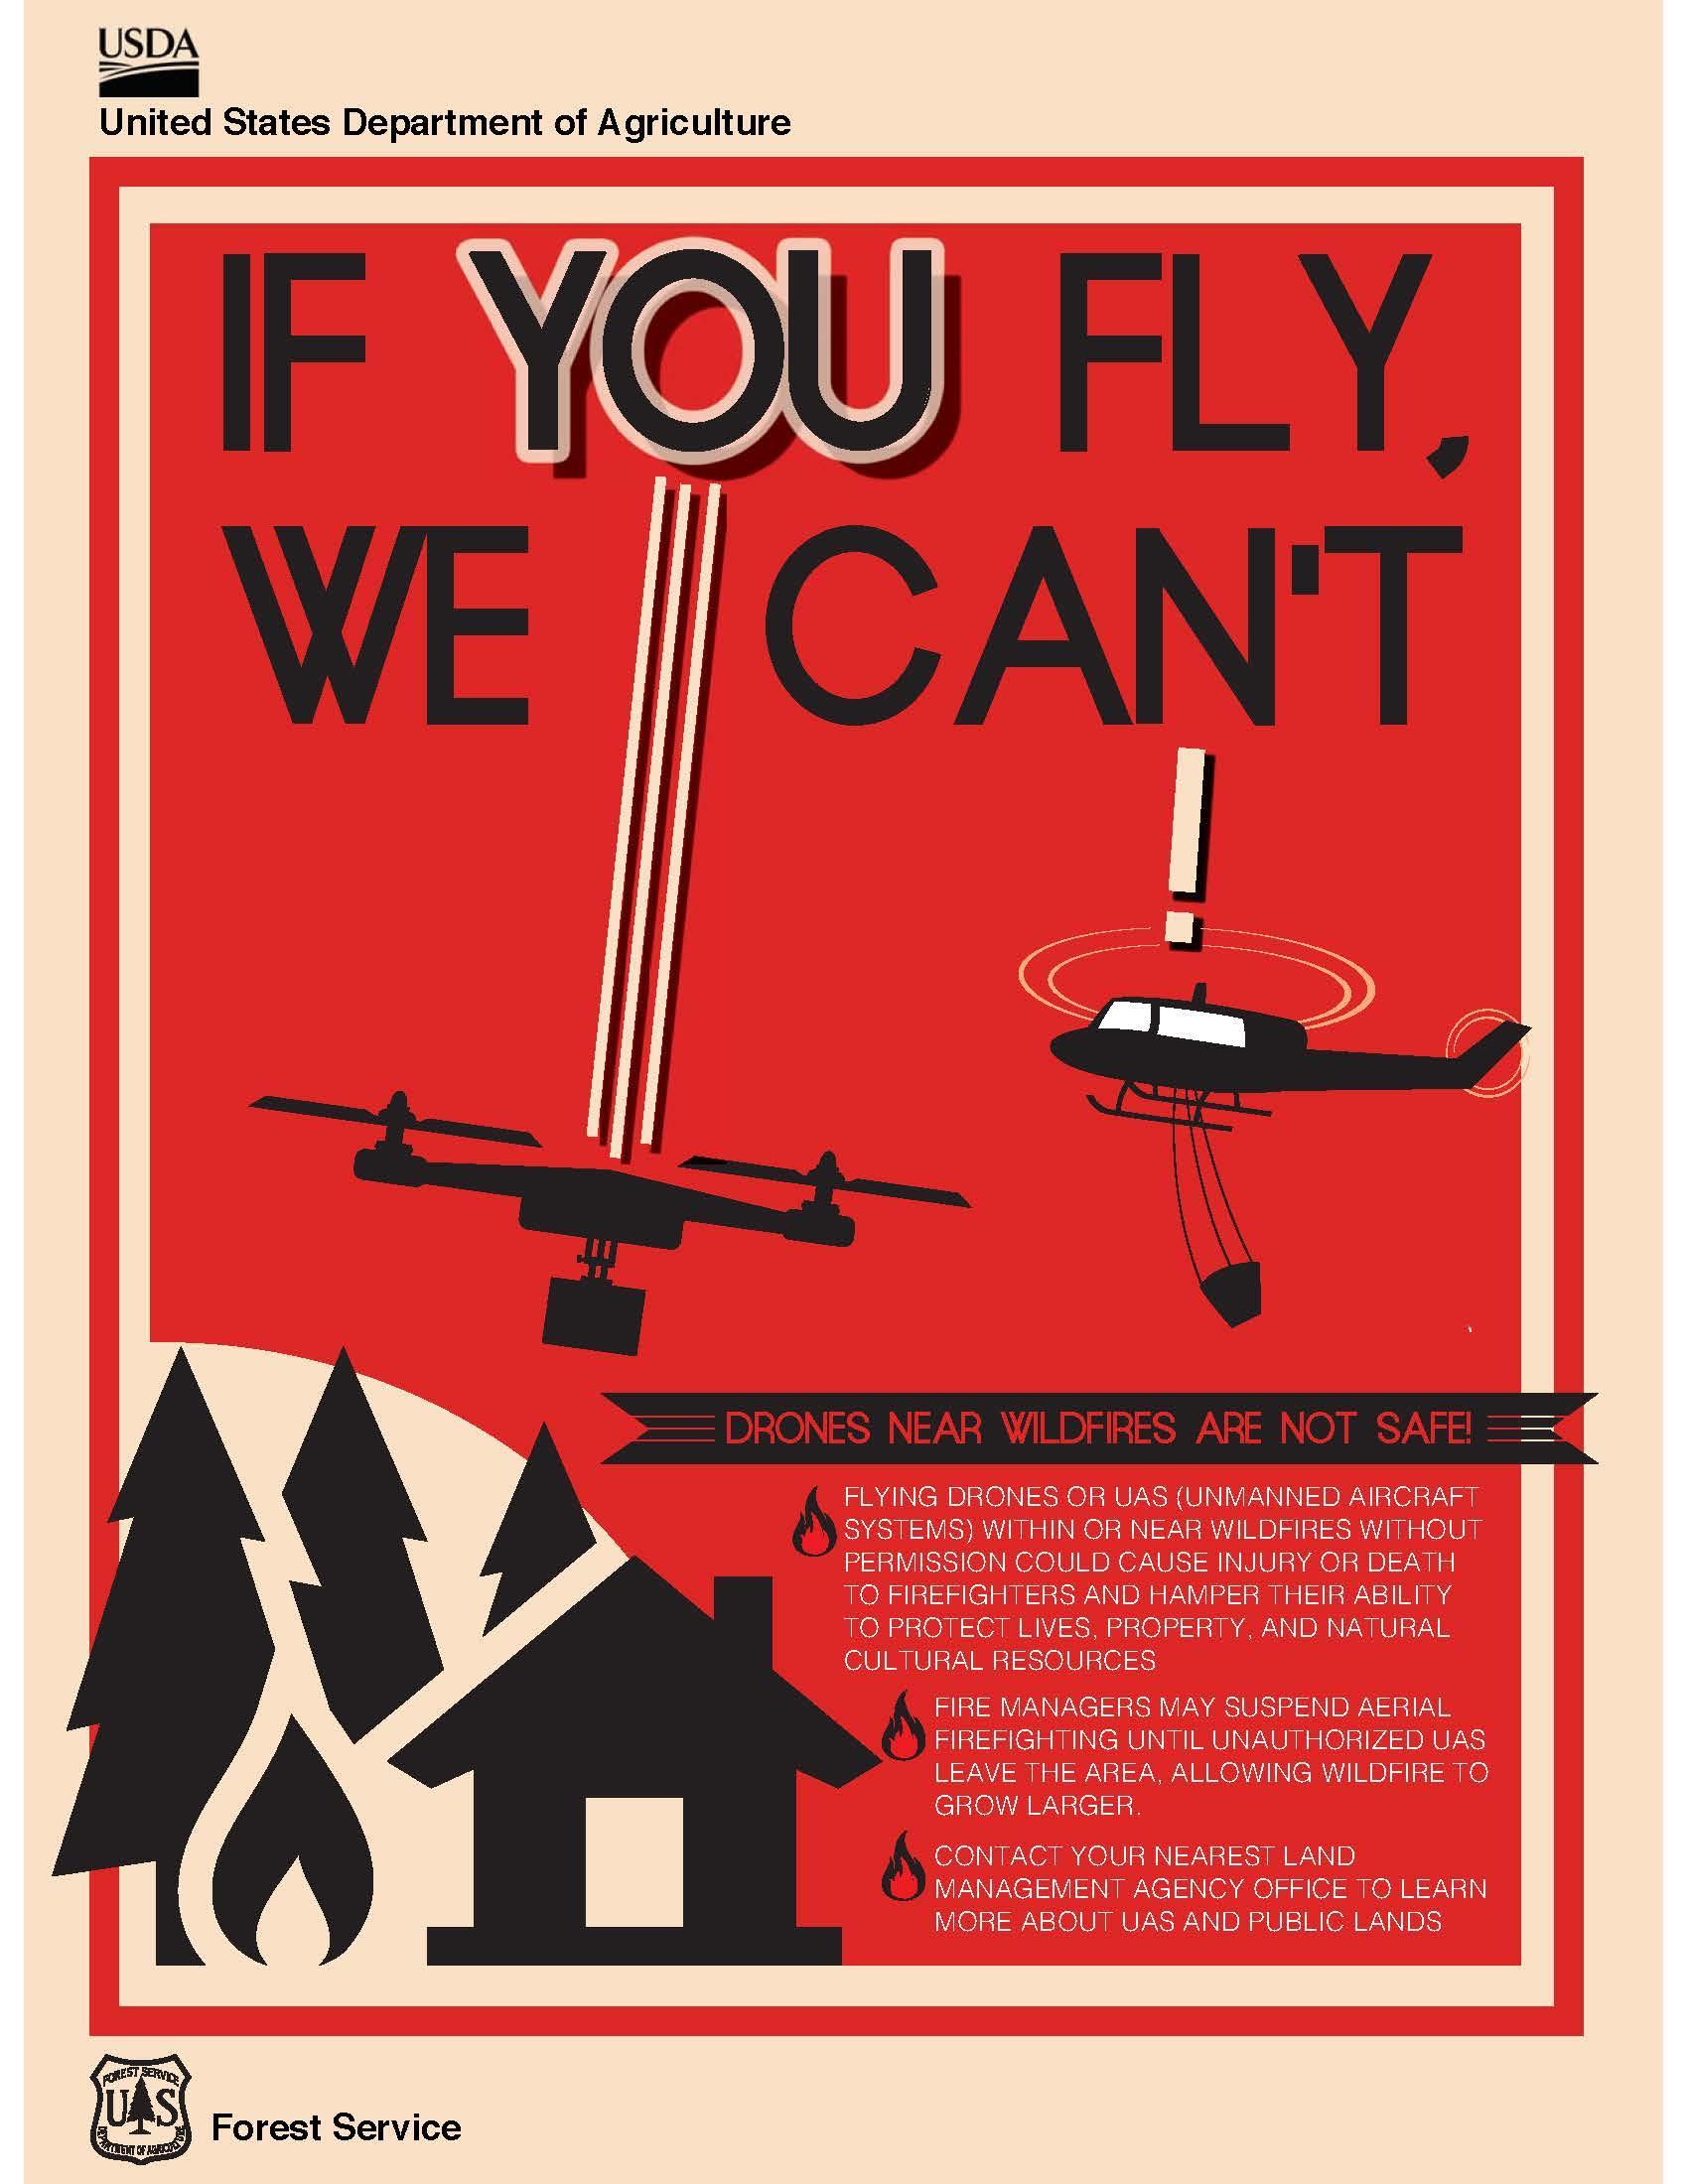 Red and black flyer with drone messaging